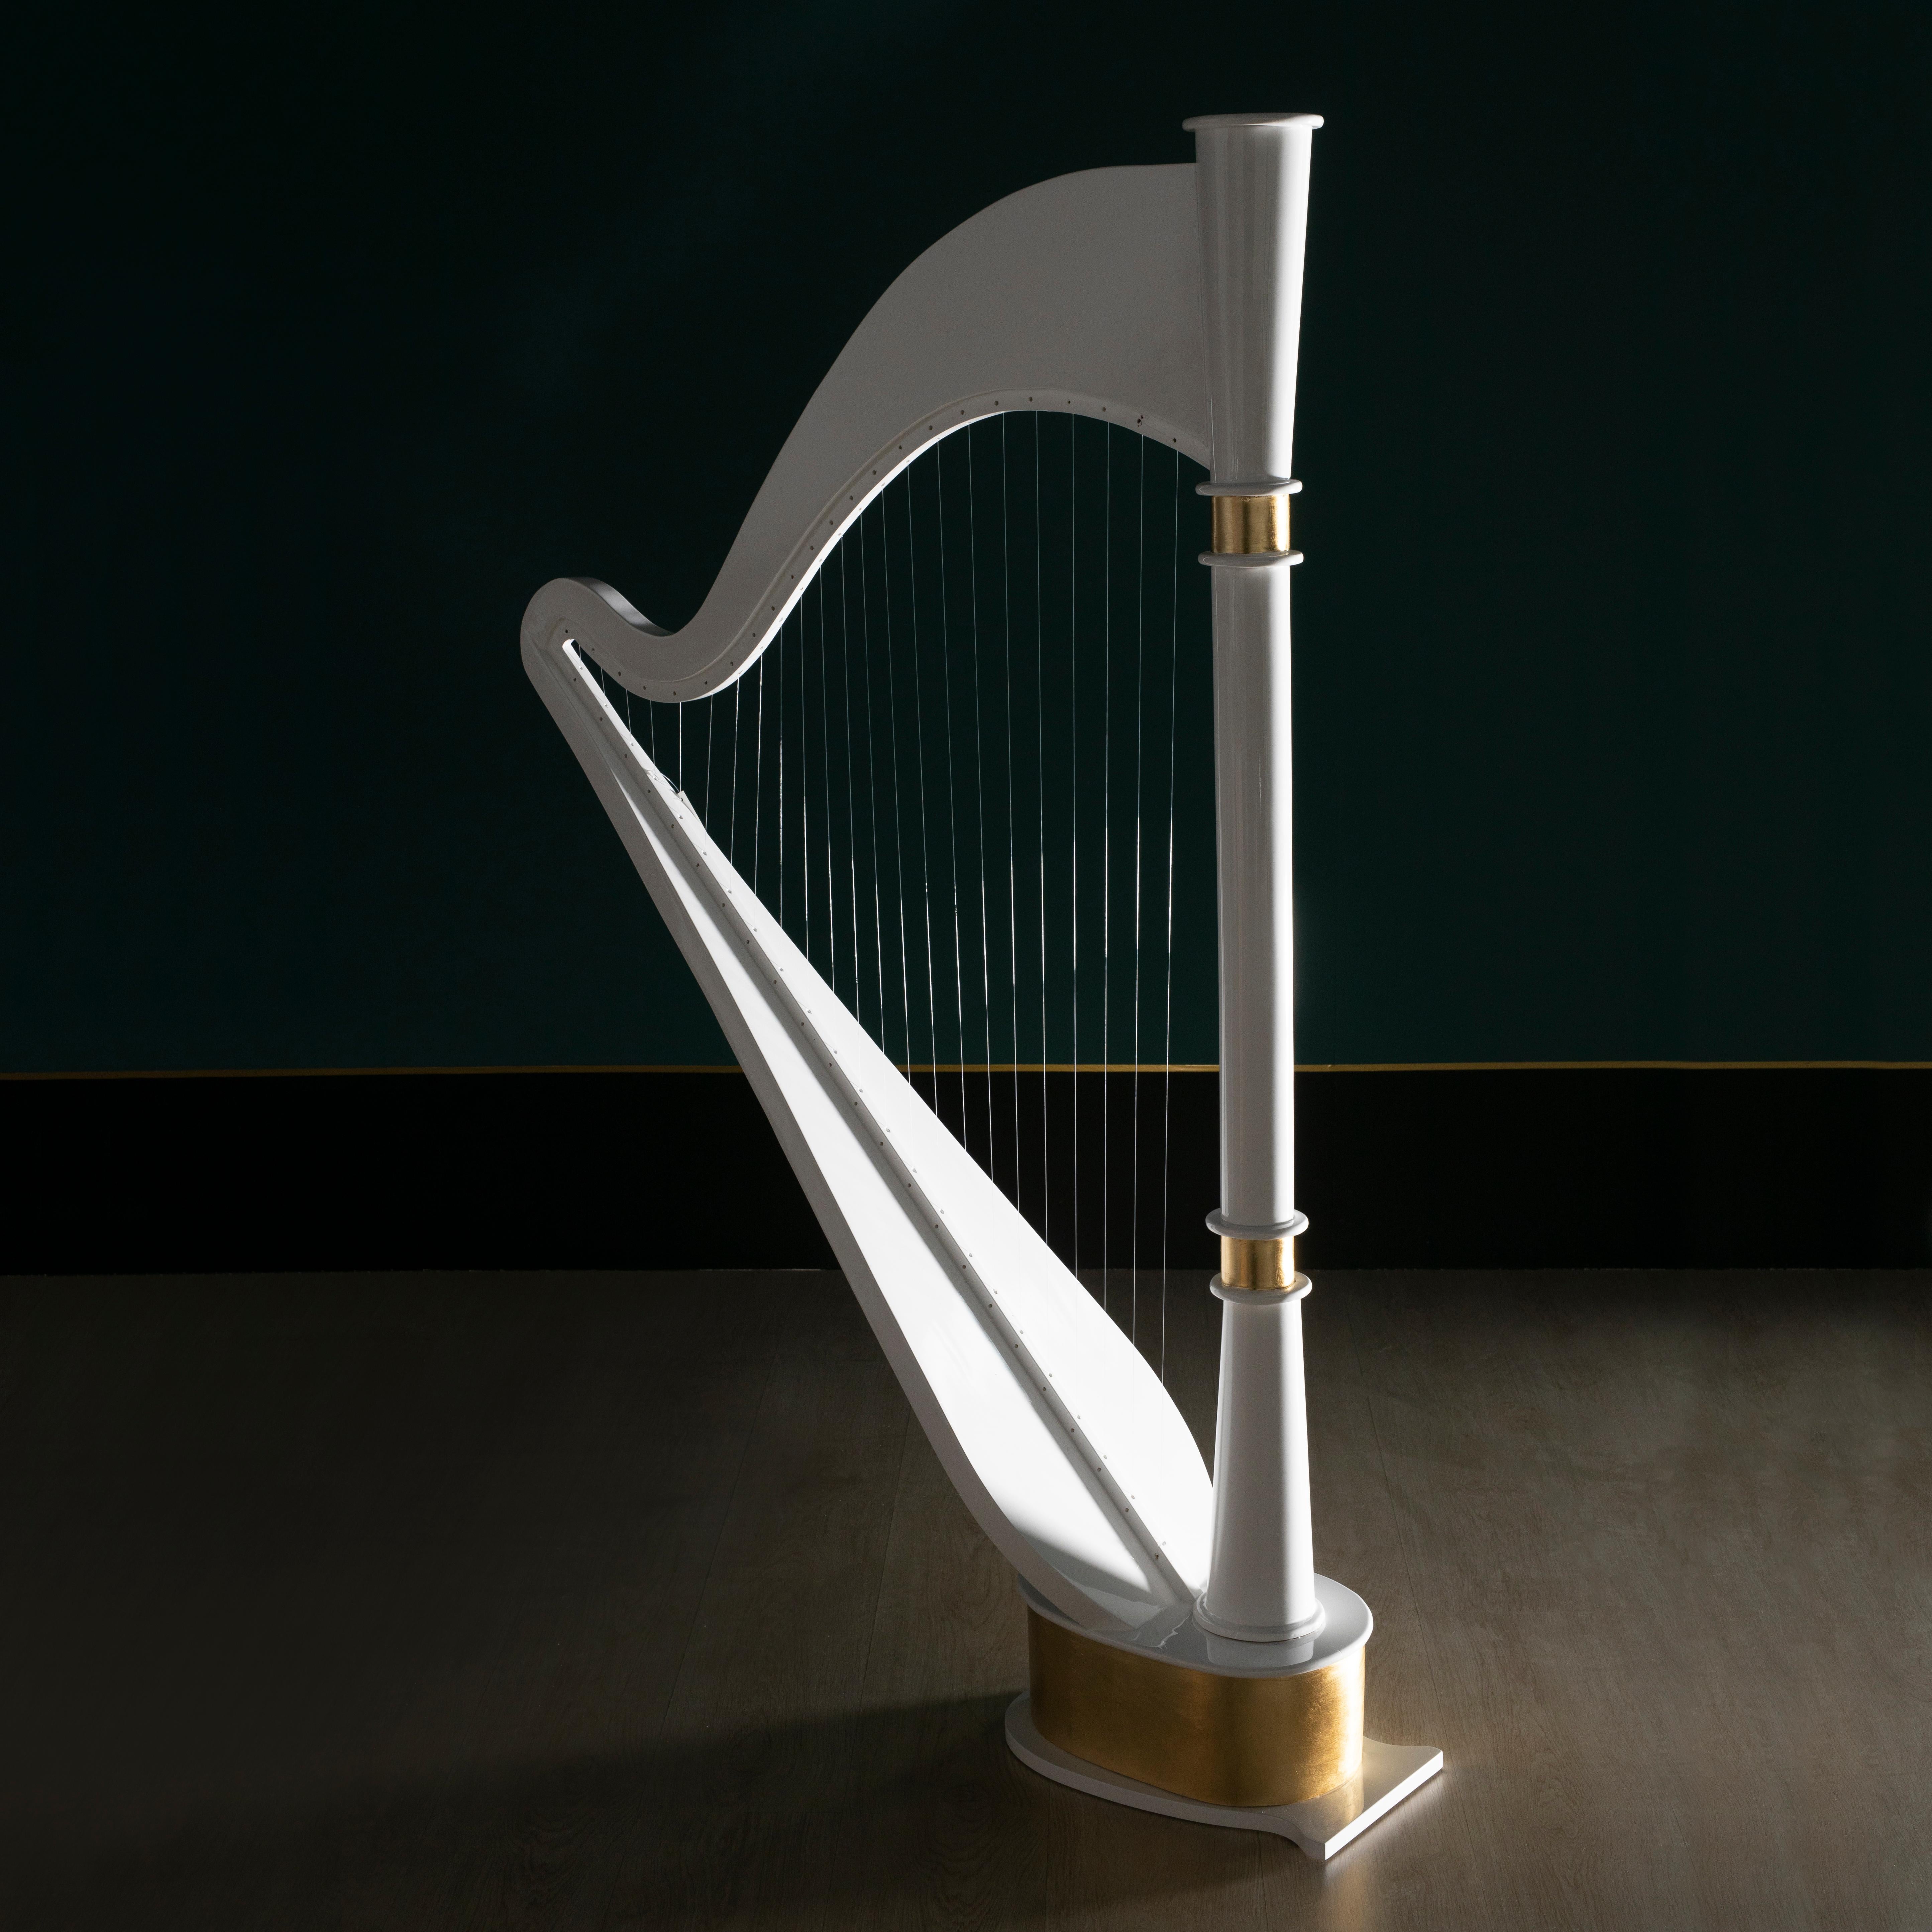 Decorative Valley Harp, Lusitanus Home Collection, Handcrafted in Portugal - Europe by Lusitanus Home.

Valley was designed to enhance luxury interiors. A decorative harp lacquered in high-gloss white with gold-leaf details applied by hand, Valley